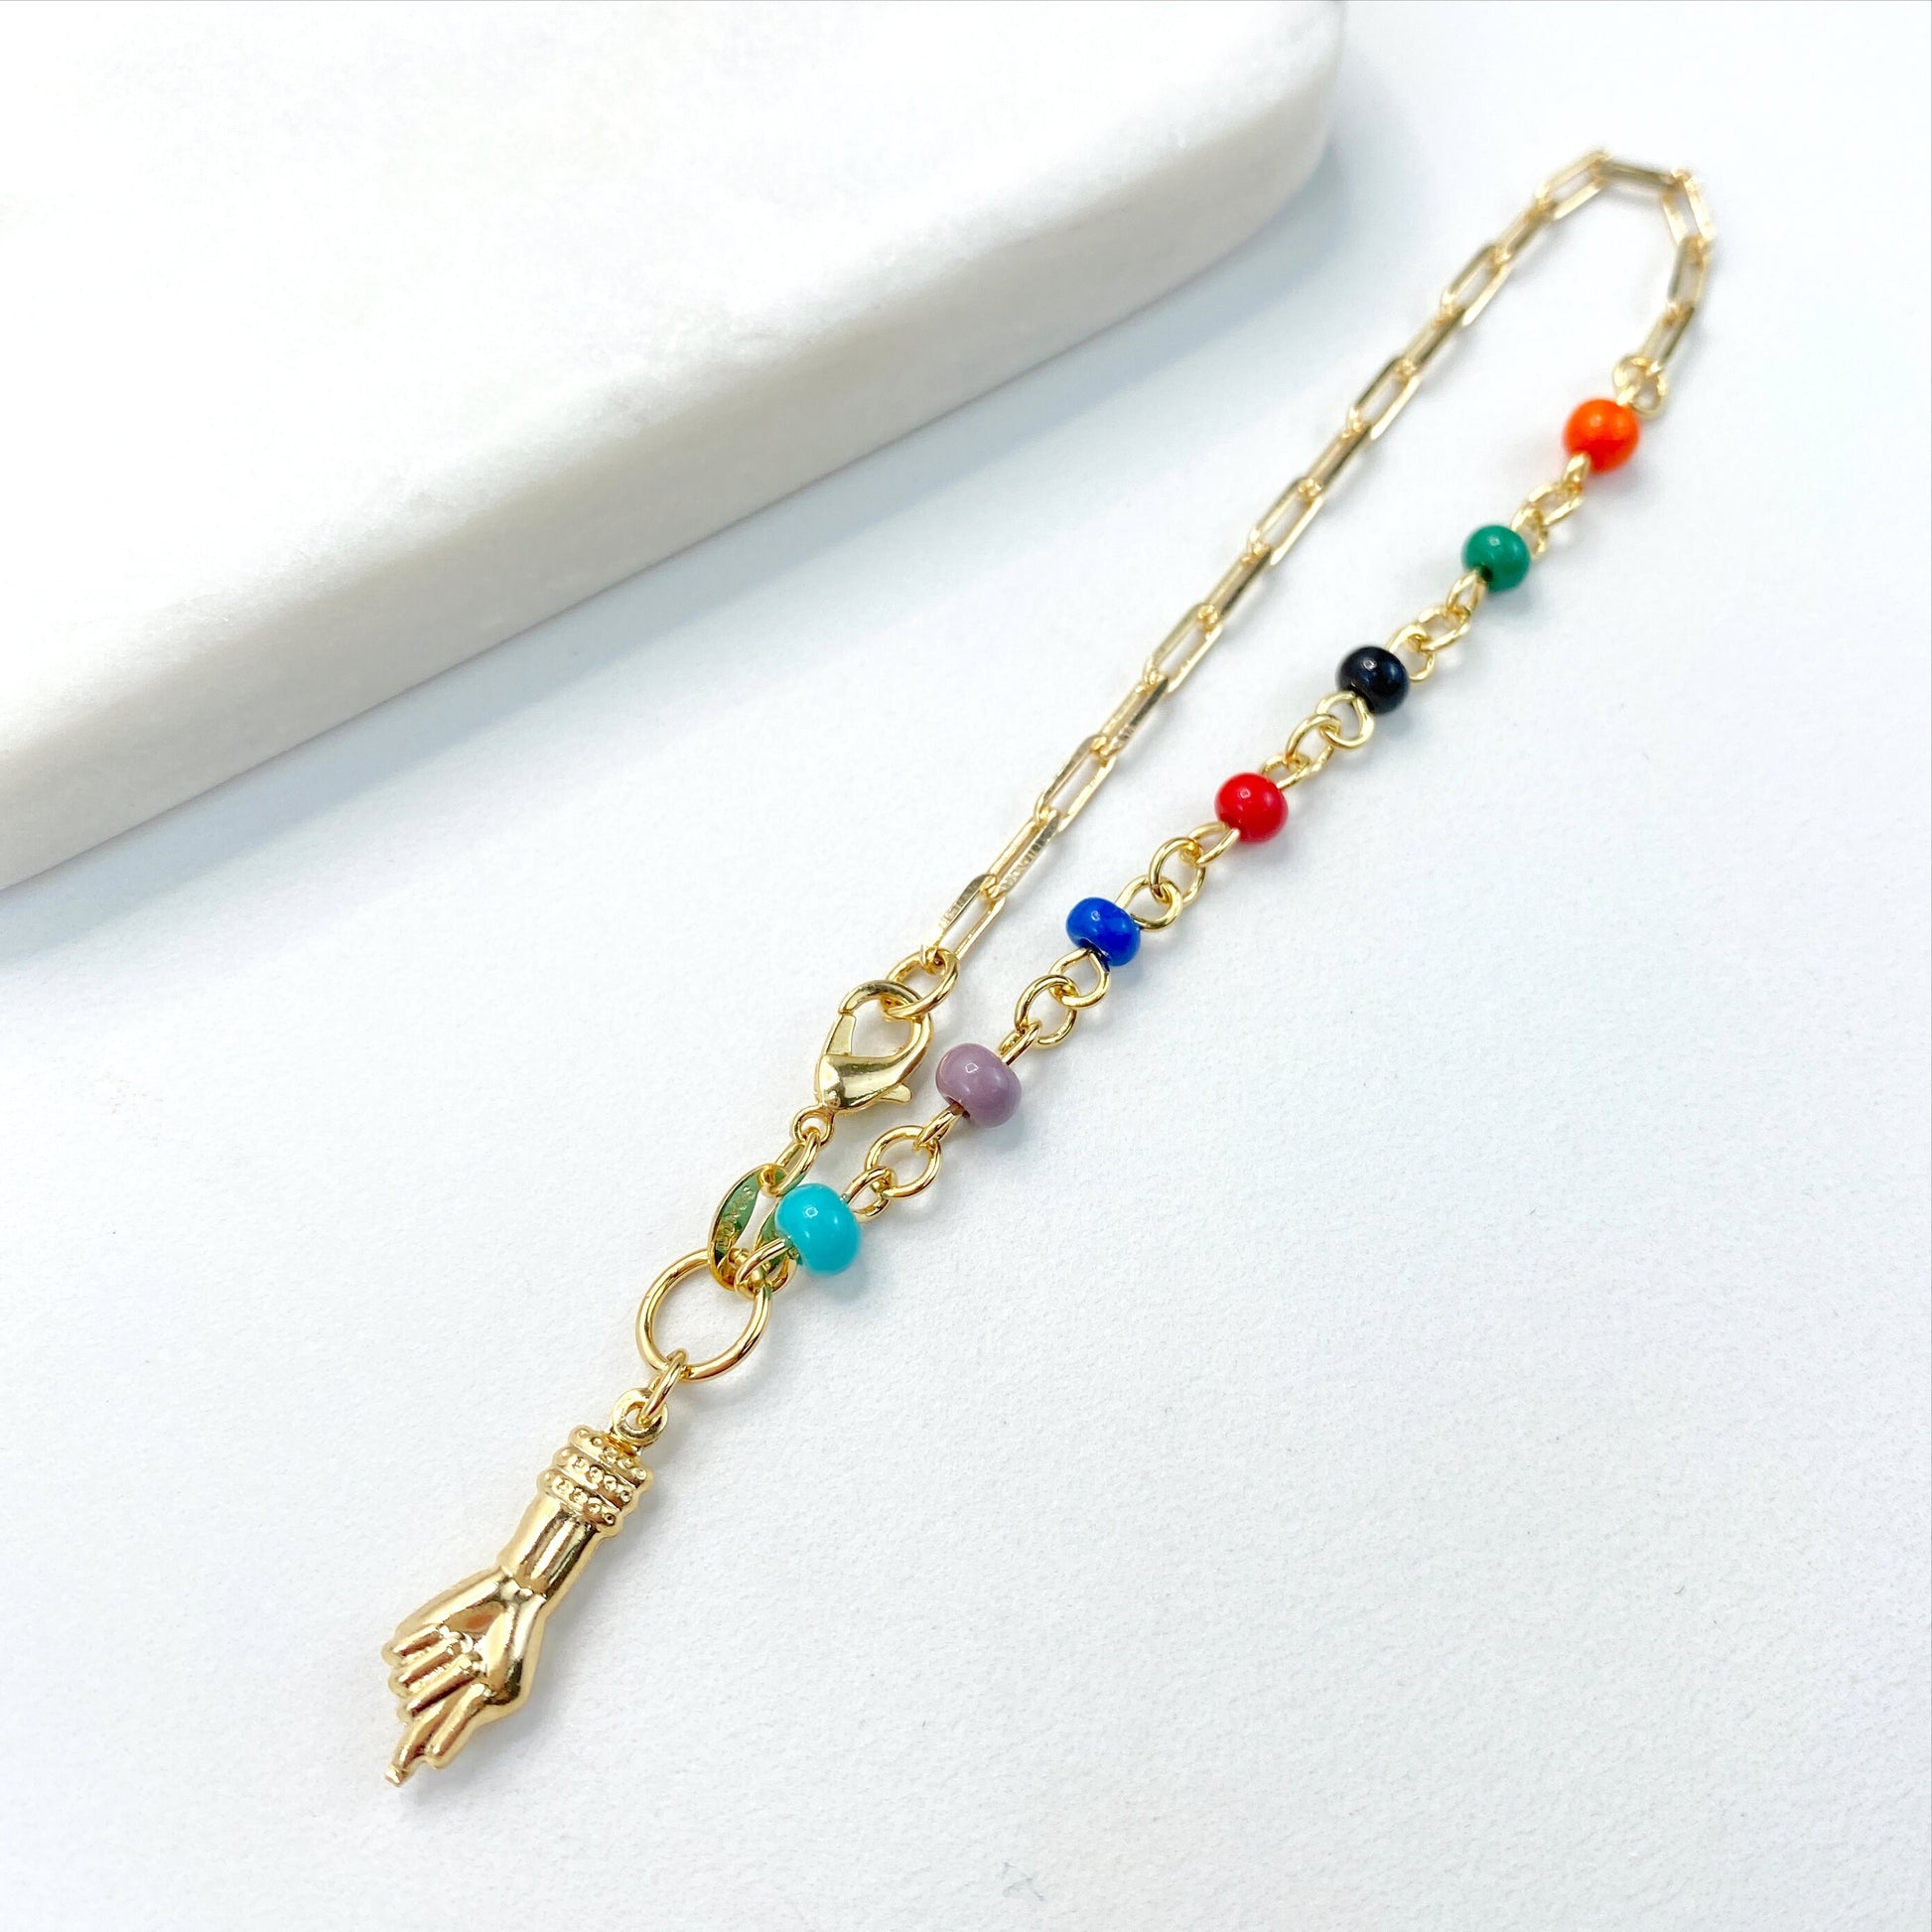 18k Gold Filled 3mm Paper Clip Chain Colored Beads Bracelet Figa Hand Wholesales Jewelry Making Supplies